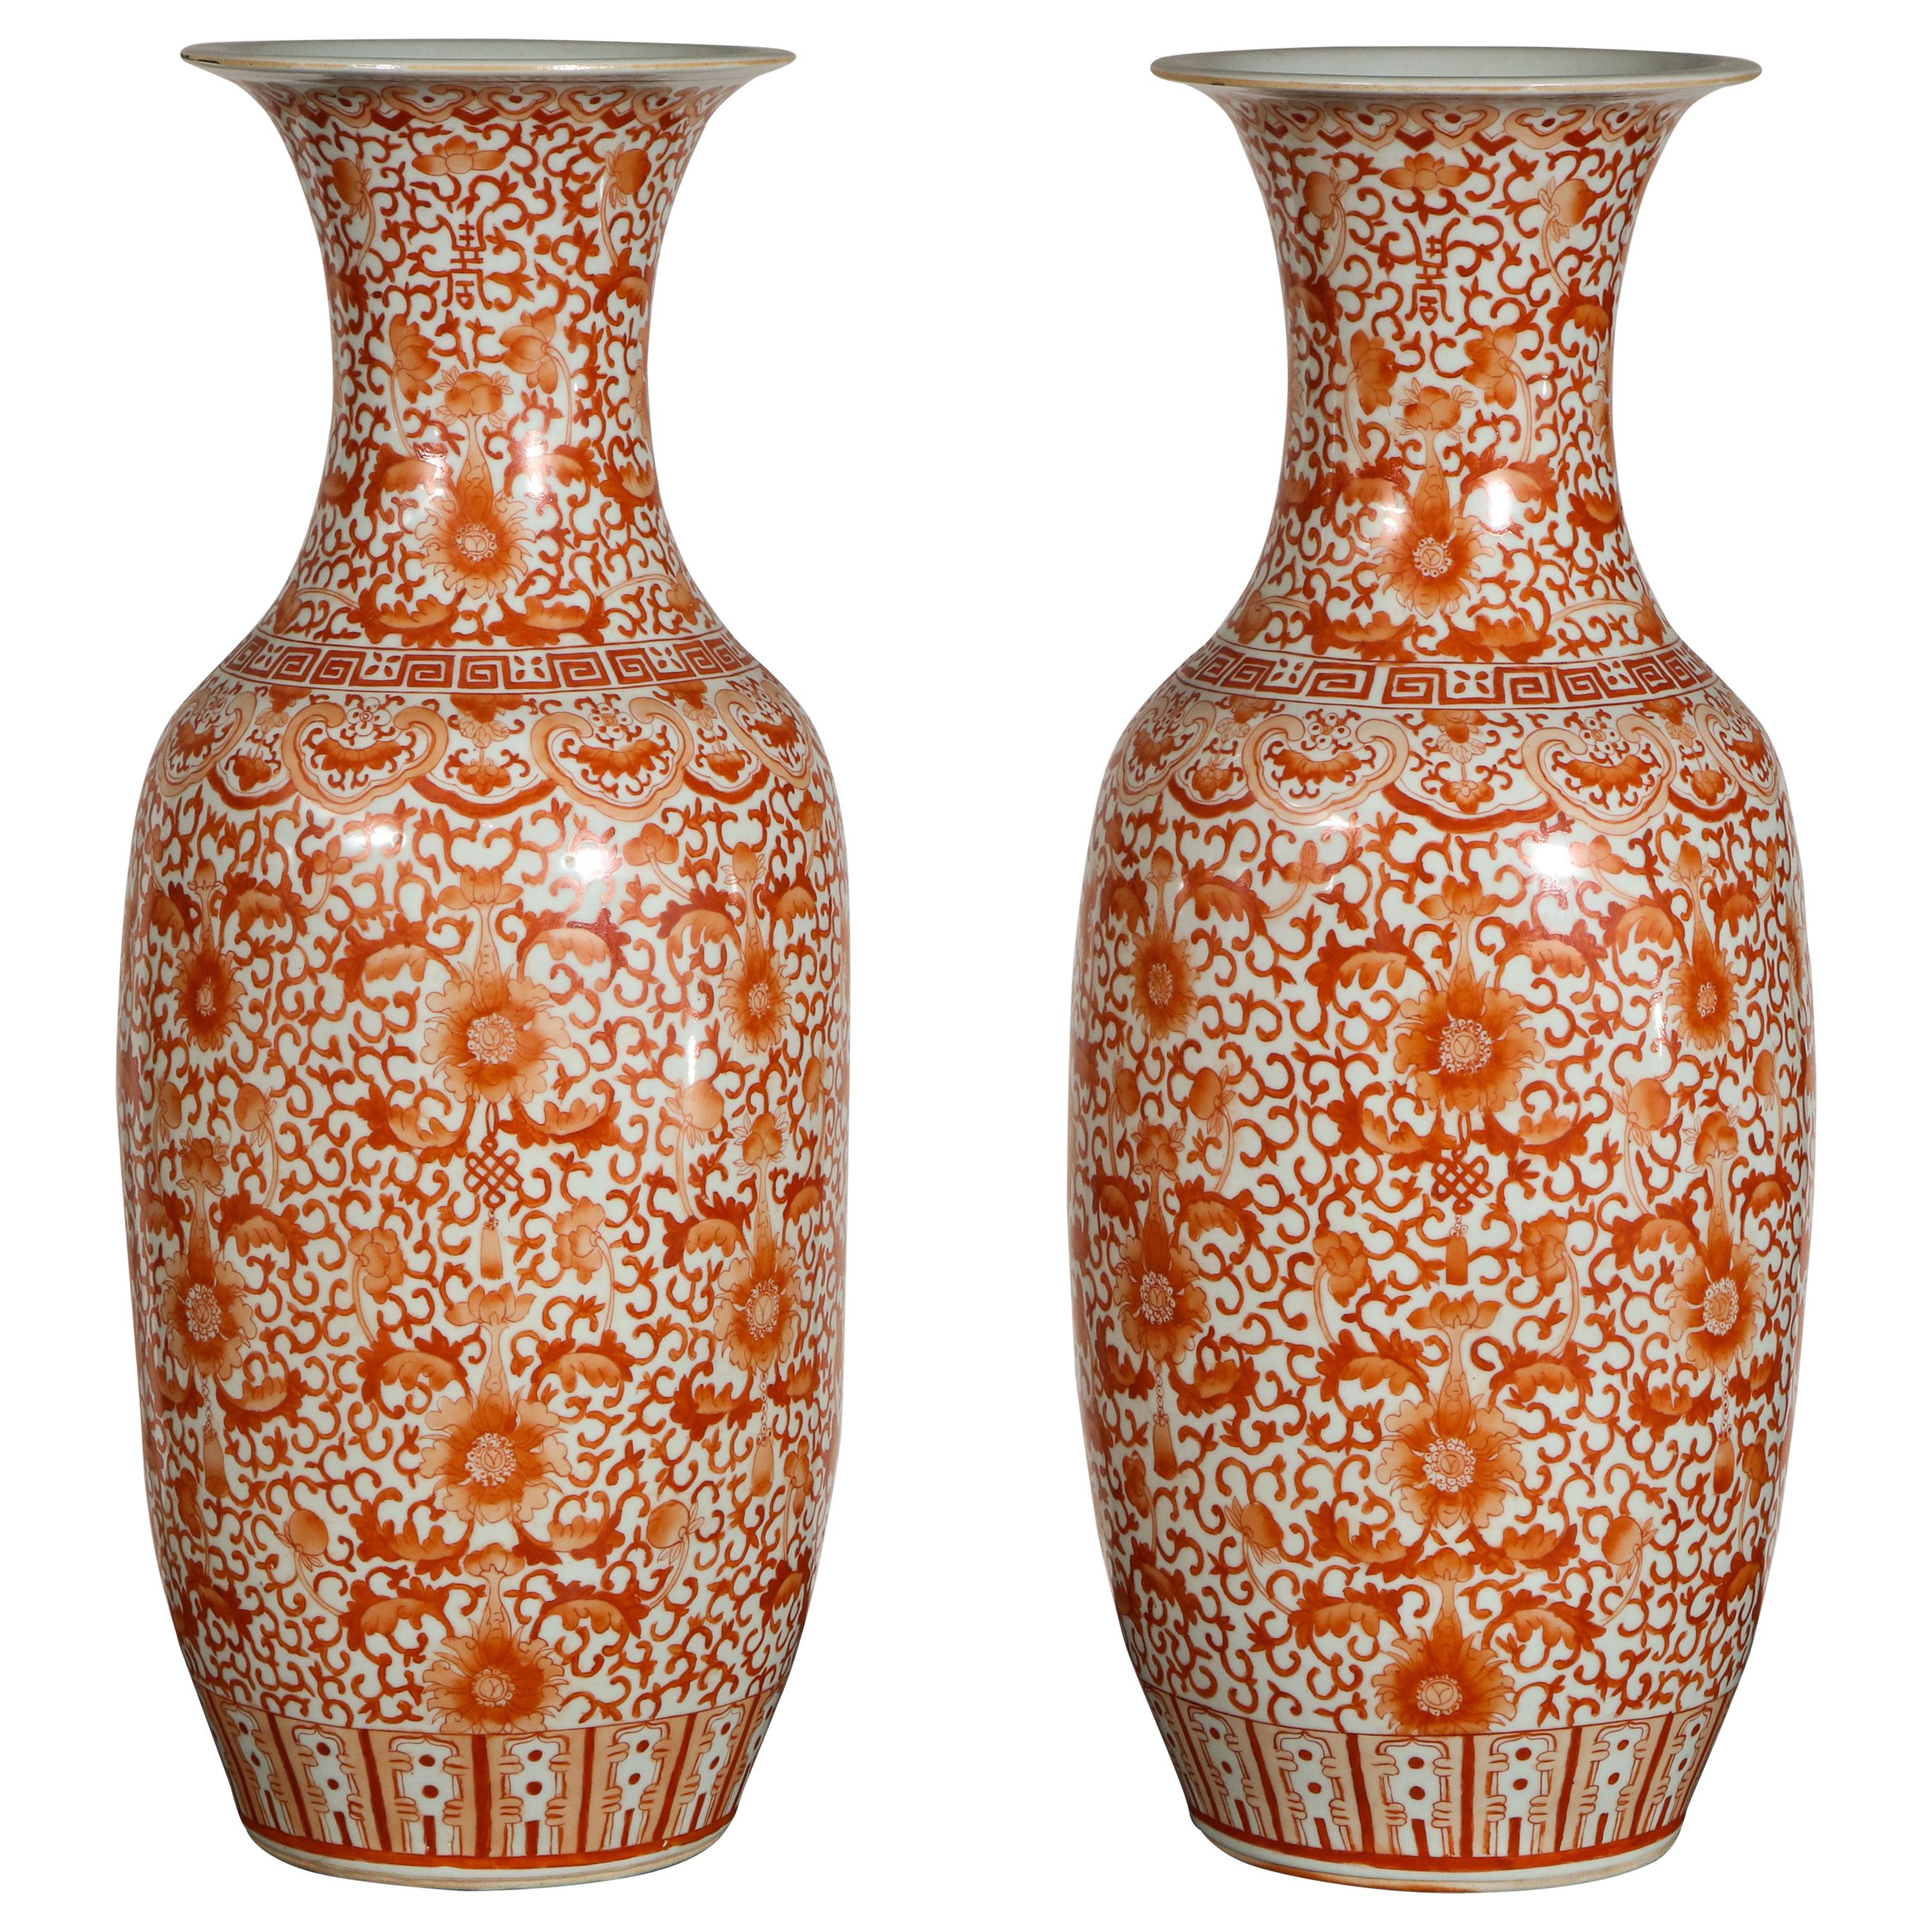 Pair of Chinese Porcelain Iron Red Rouleau Vases